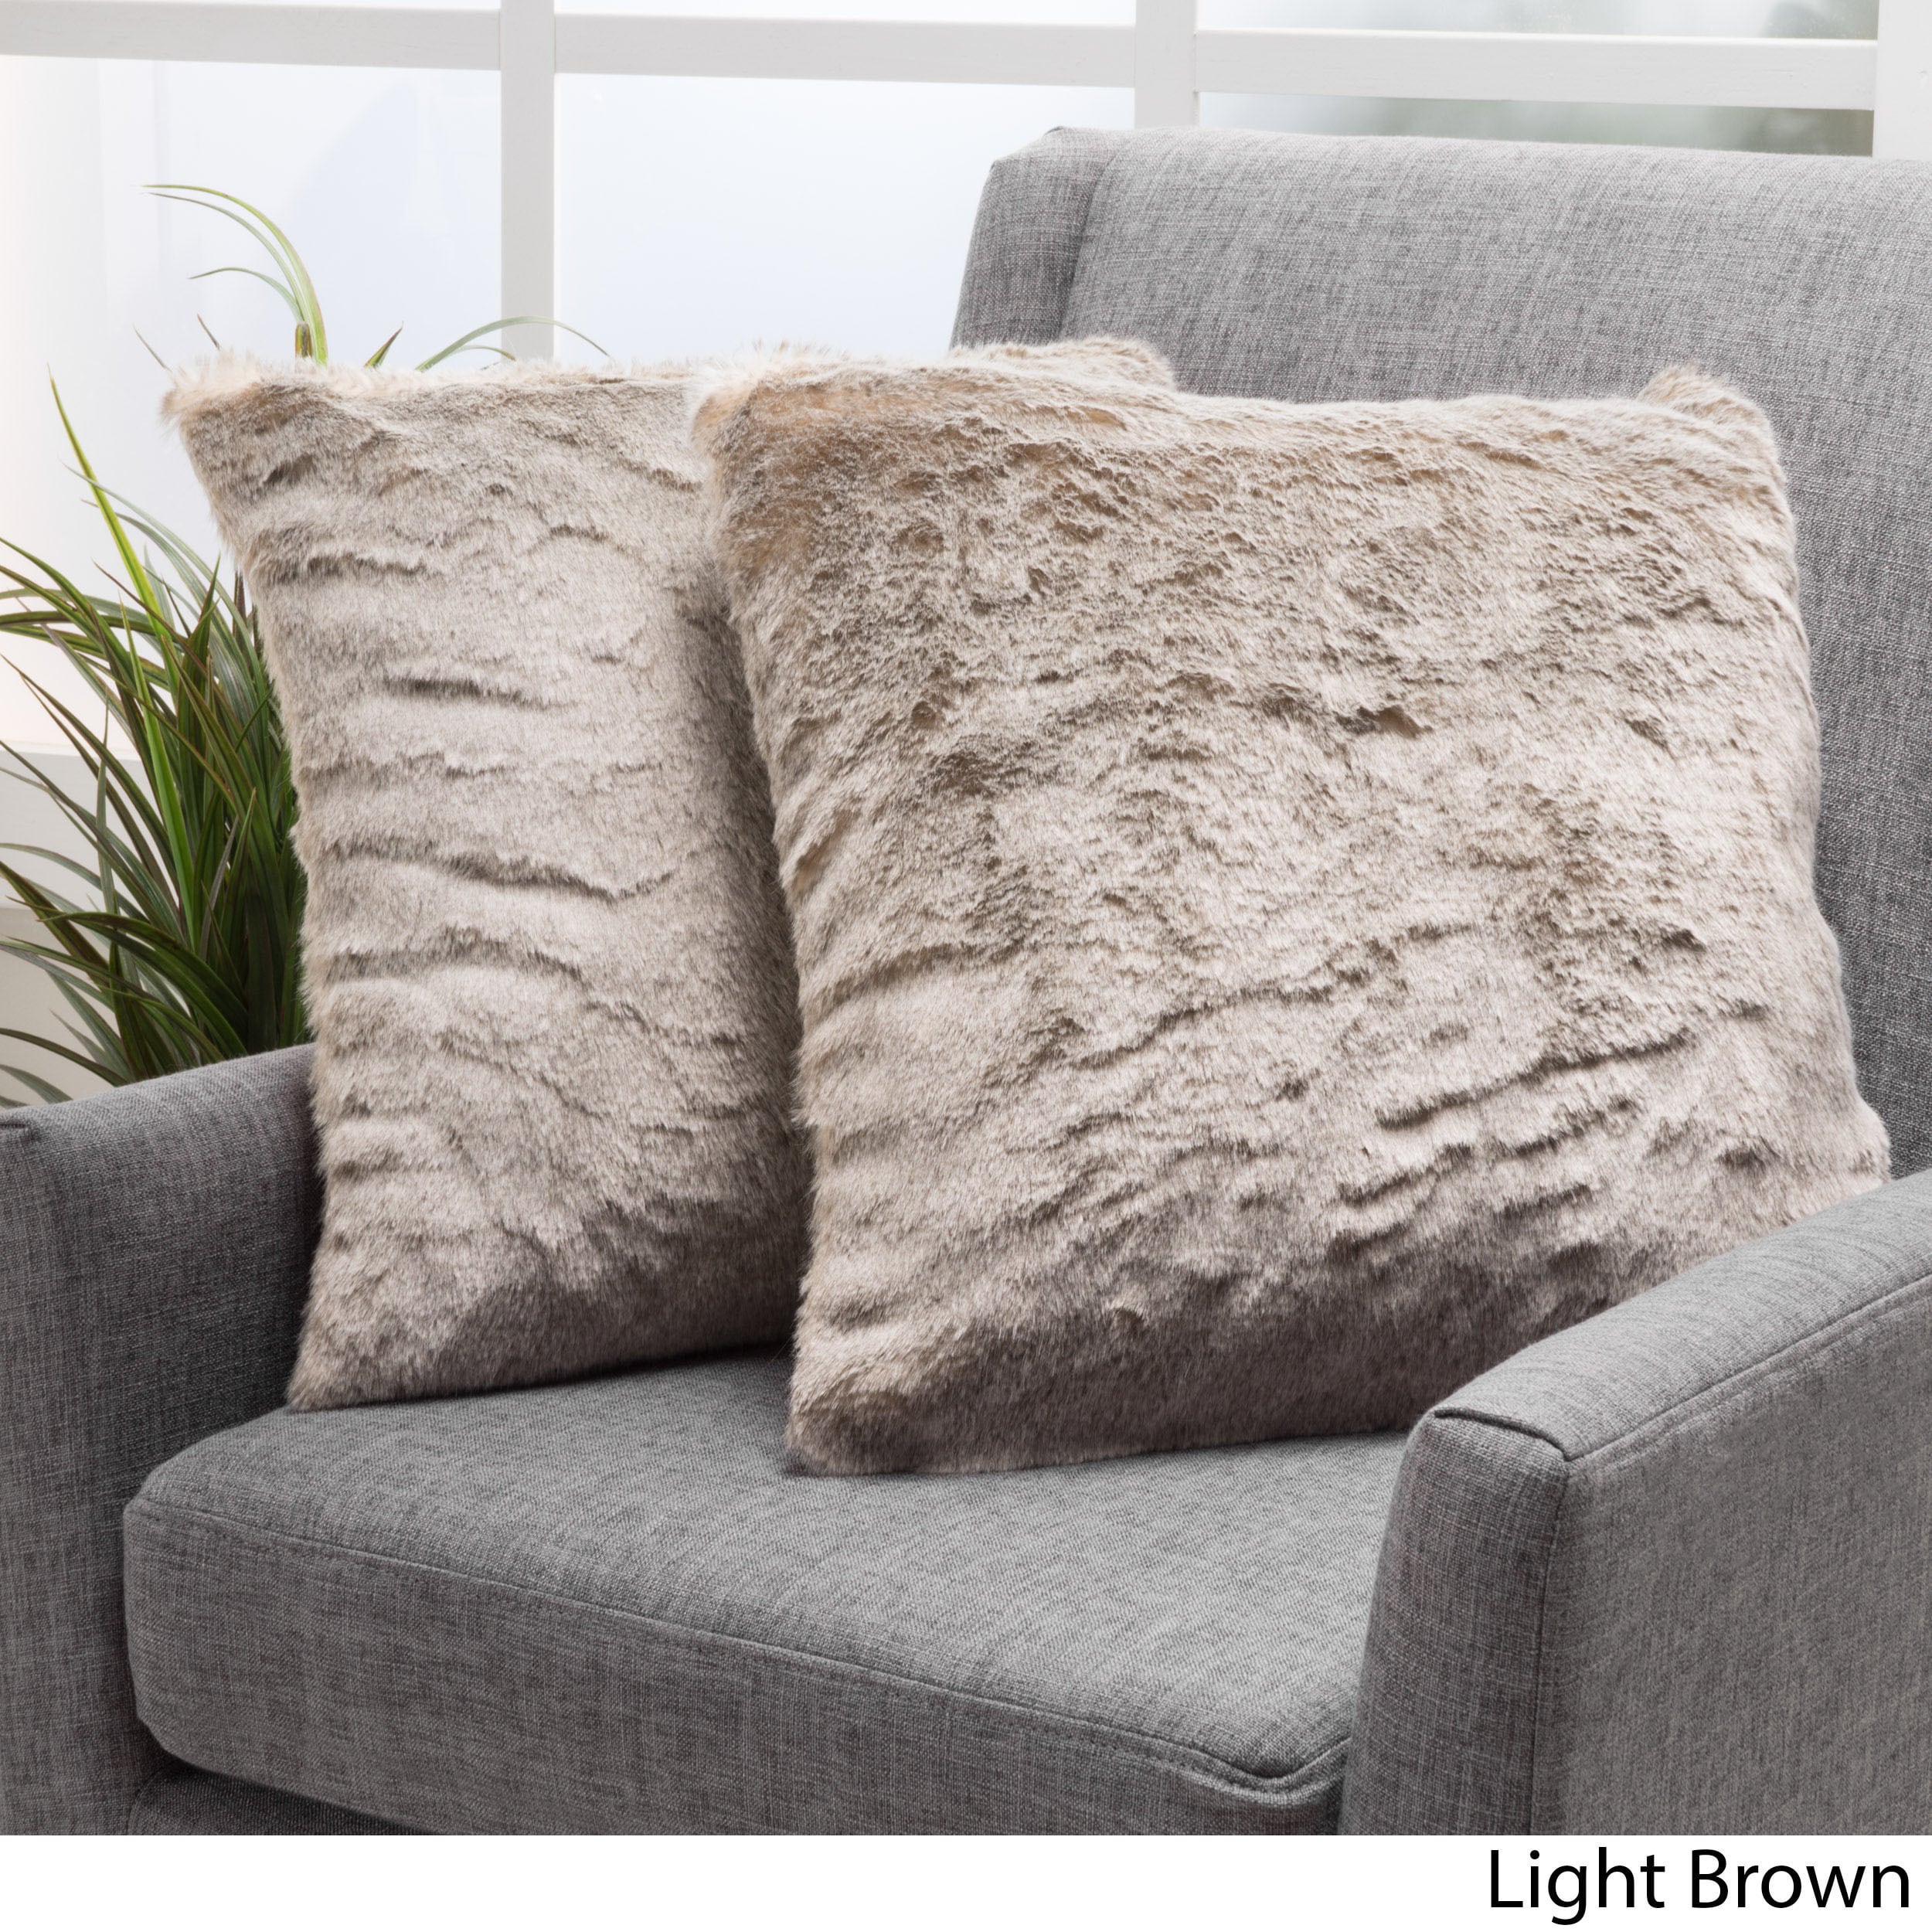 Christopher Knight Home Elise Modern Glam Faux Fur Throw Pillows (Set of 2) by - image 1 of 5